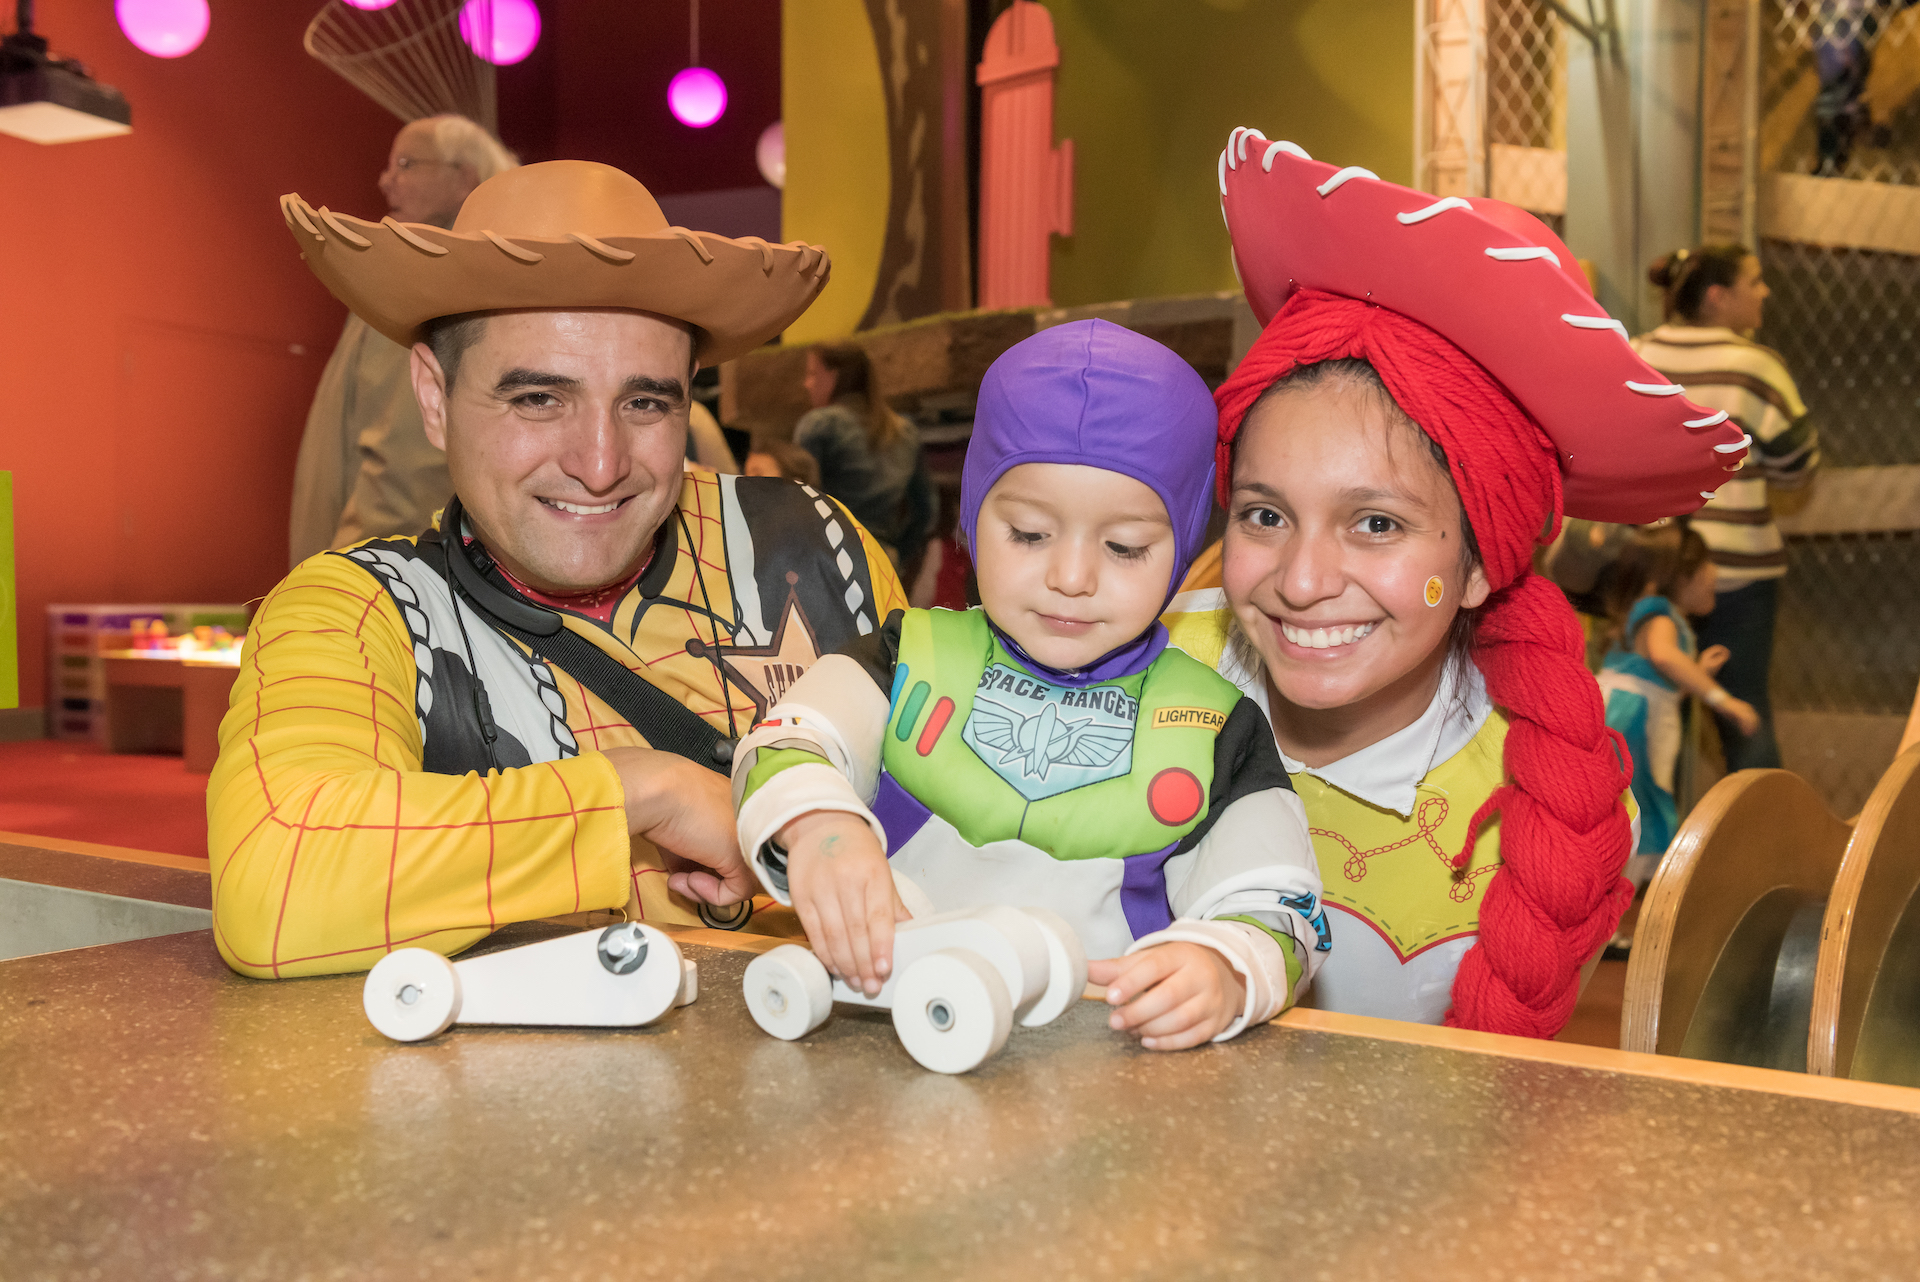 Guests in Toy Story costumes